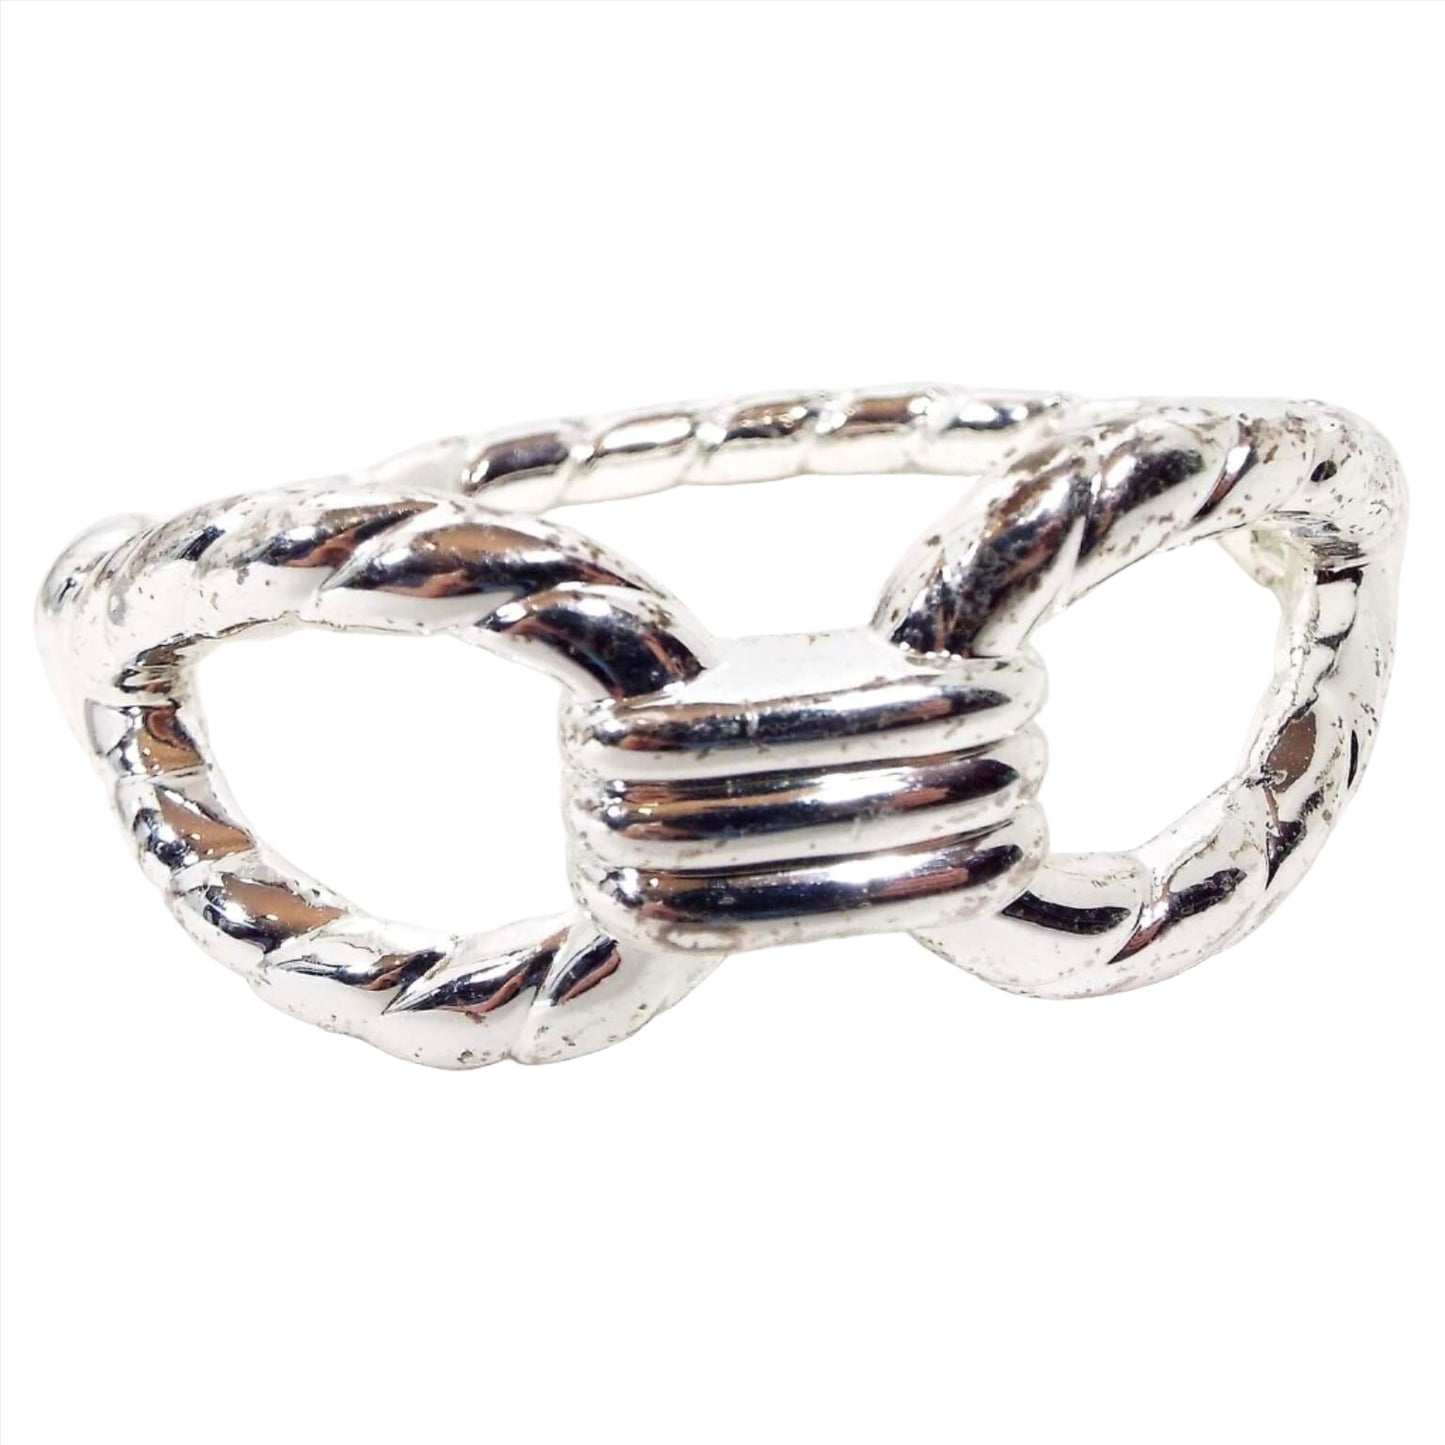 Front view of the retro vintage clamper bracelet, It is silver tone in color with a few tiny spots where it's darkening from age. It has a twisted rope like design that has a large open area on each side. The hinged part of the bracelet is on the side of the bracelet.